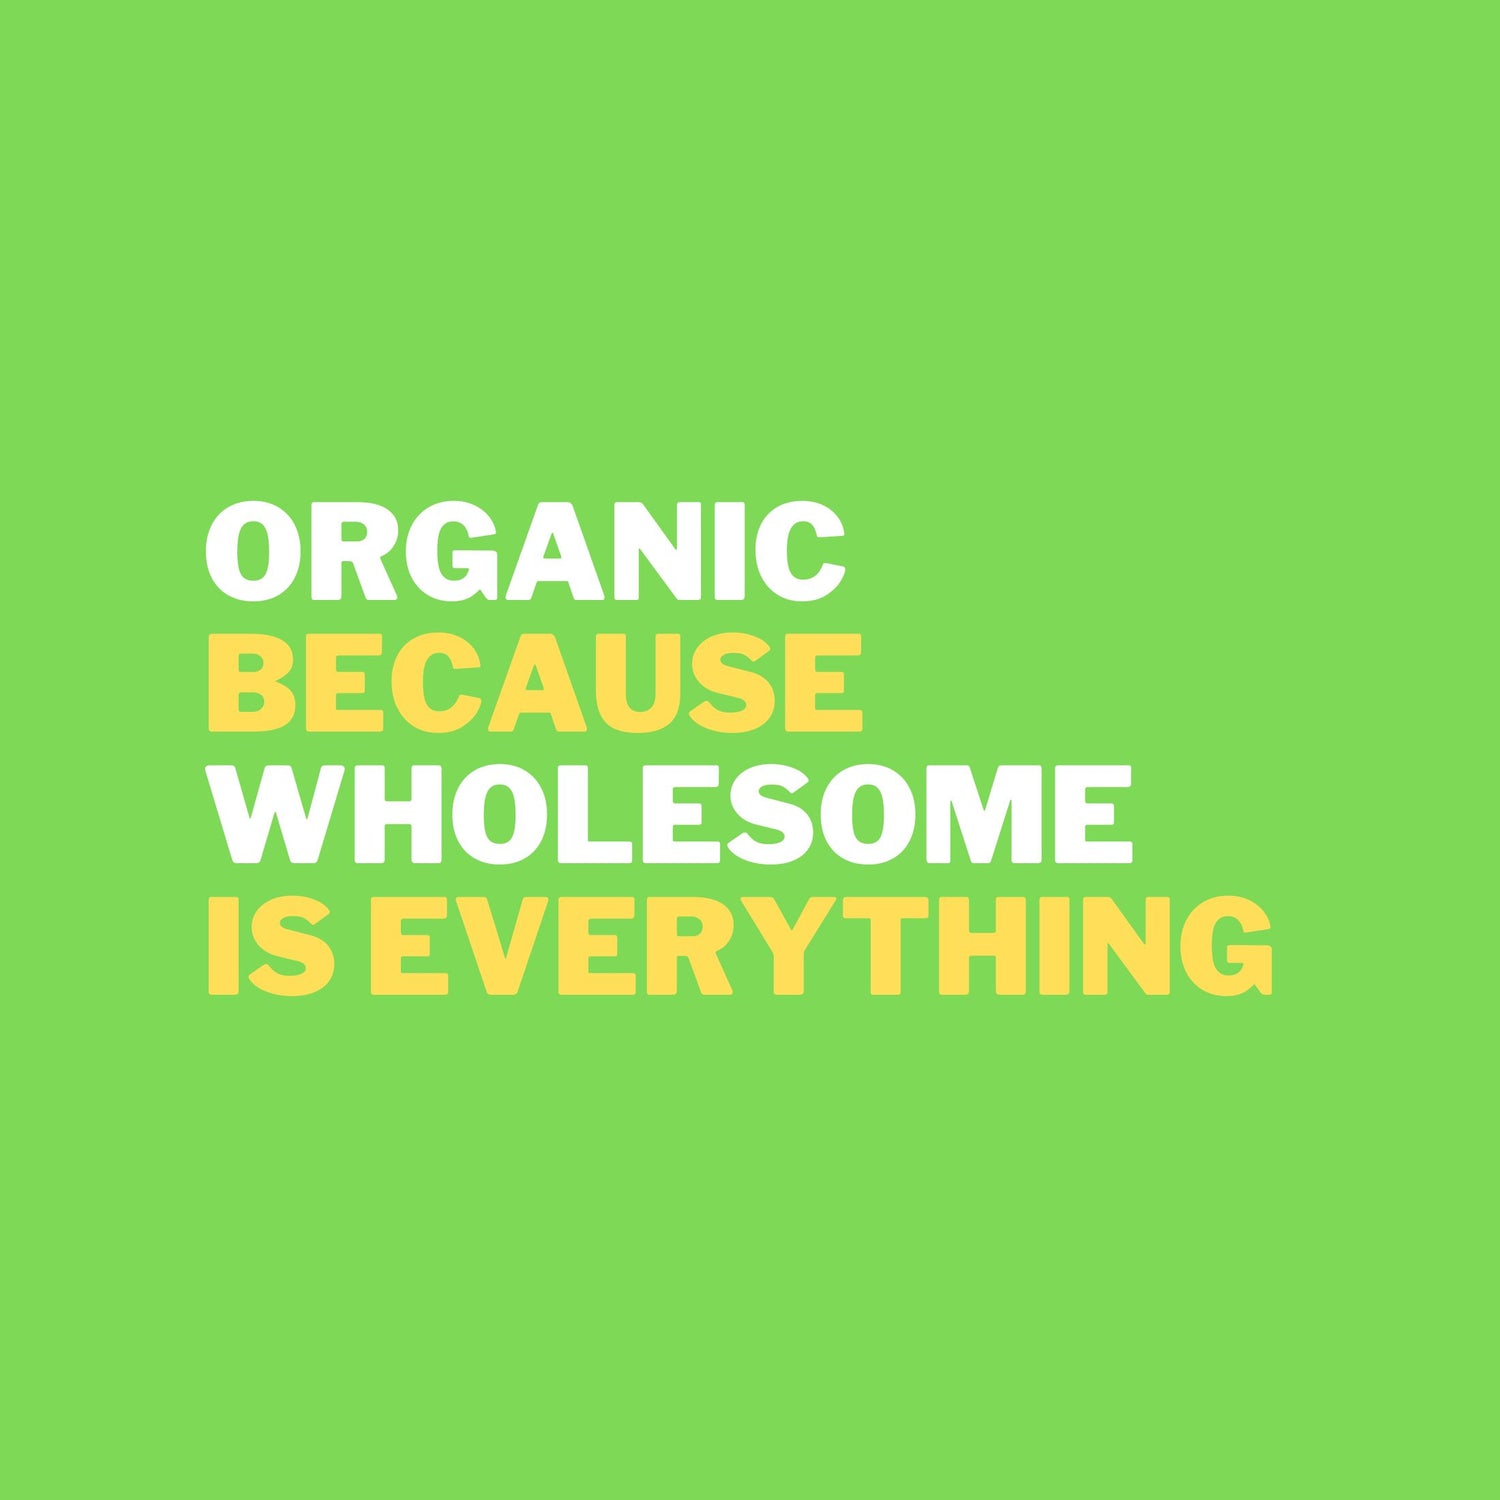 Organic Because Wholesome is everything